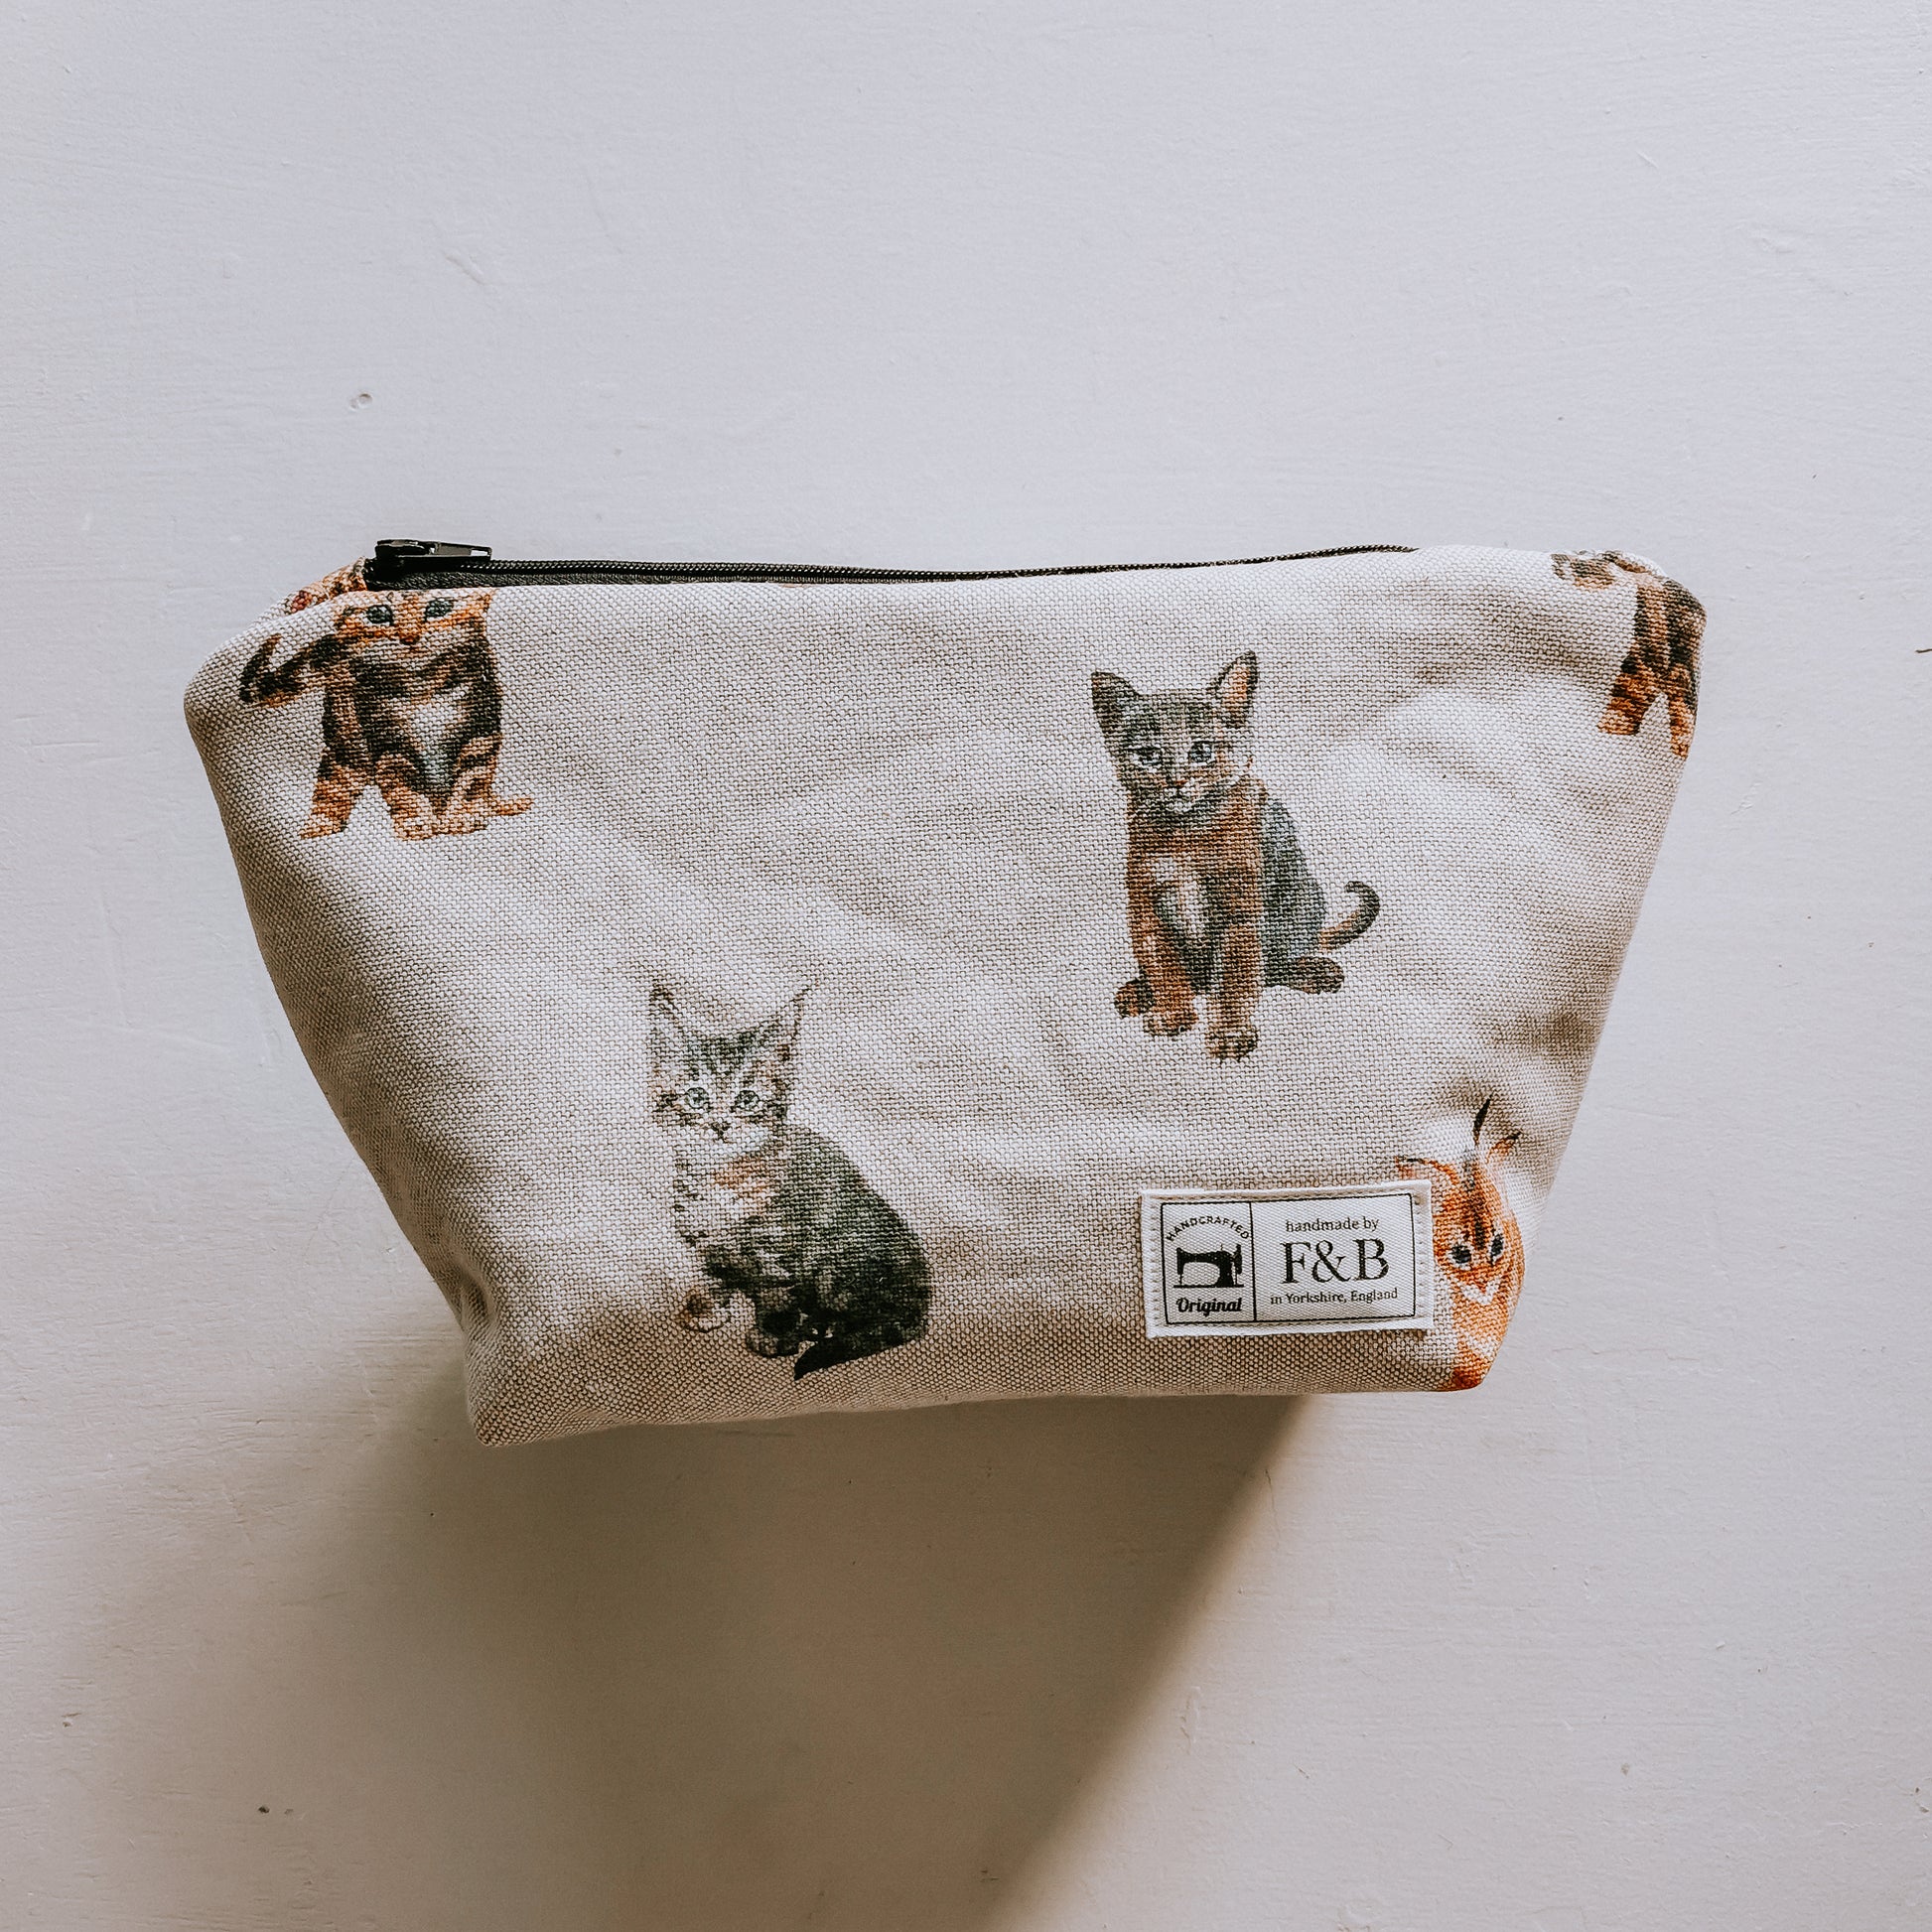 F&B - Handmade cat and kitten wash bag and make up bag - perfect for gifts